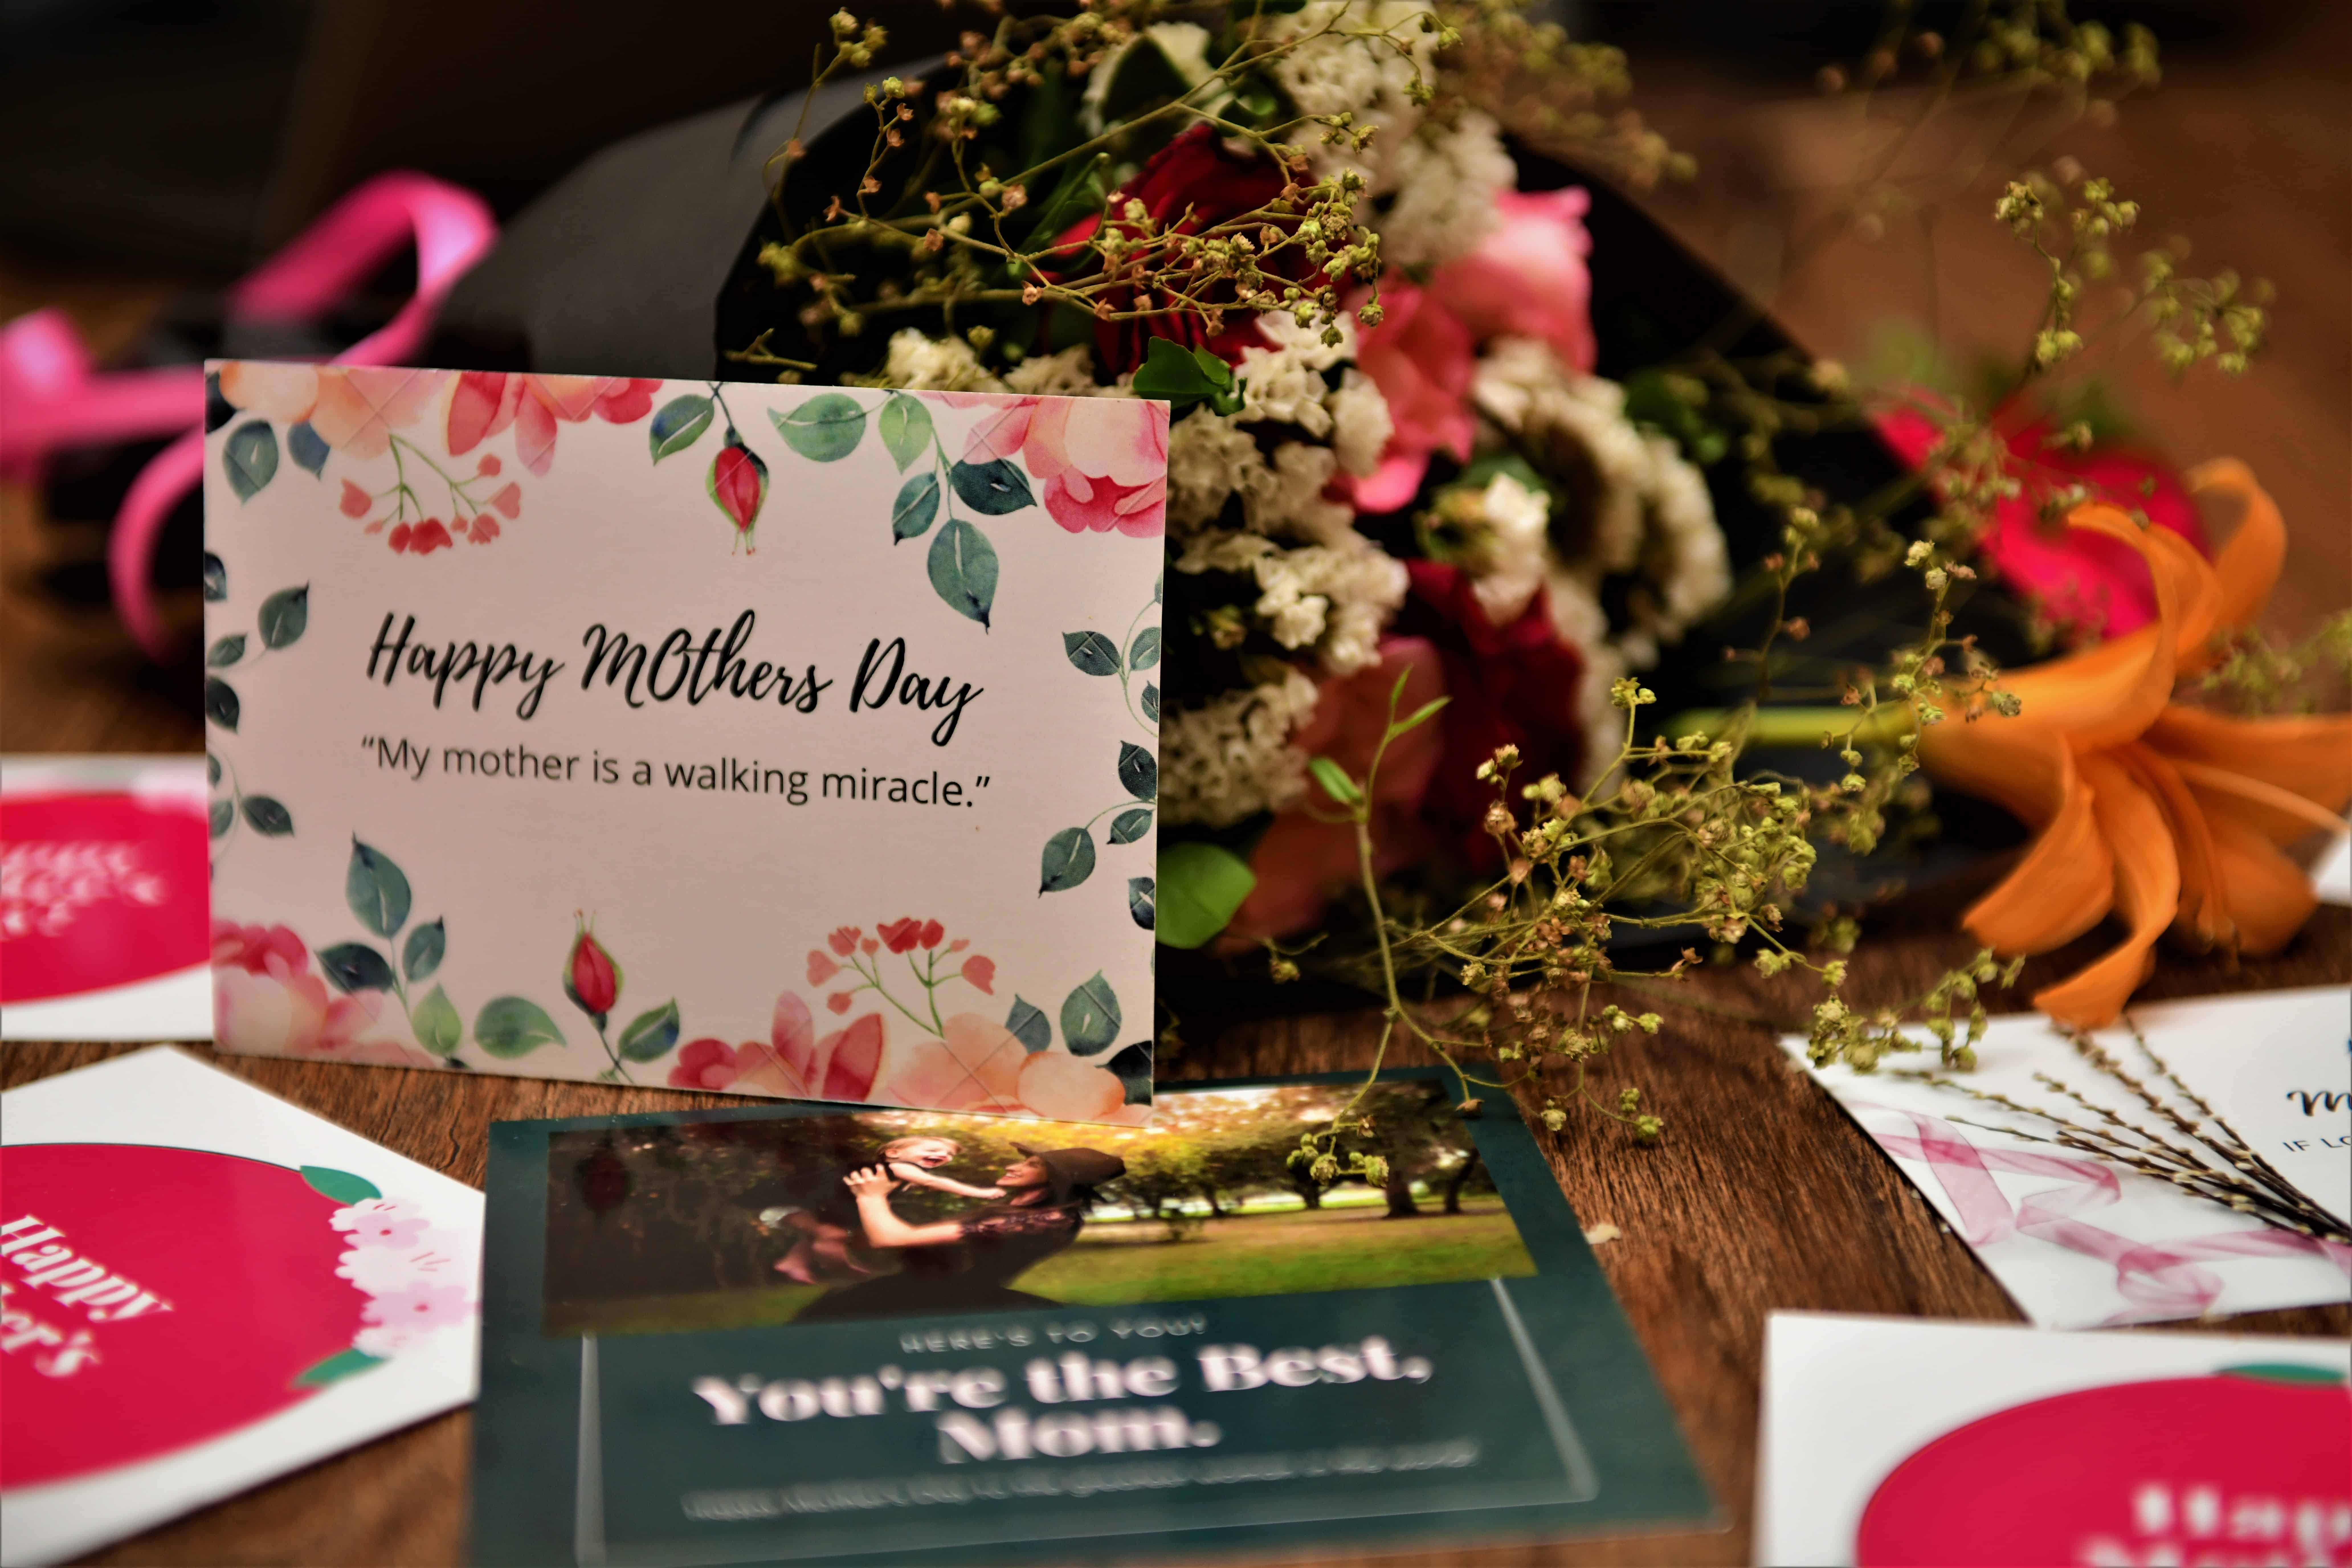 Card that says Happy Mother's Day with flowers on the table next to it.